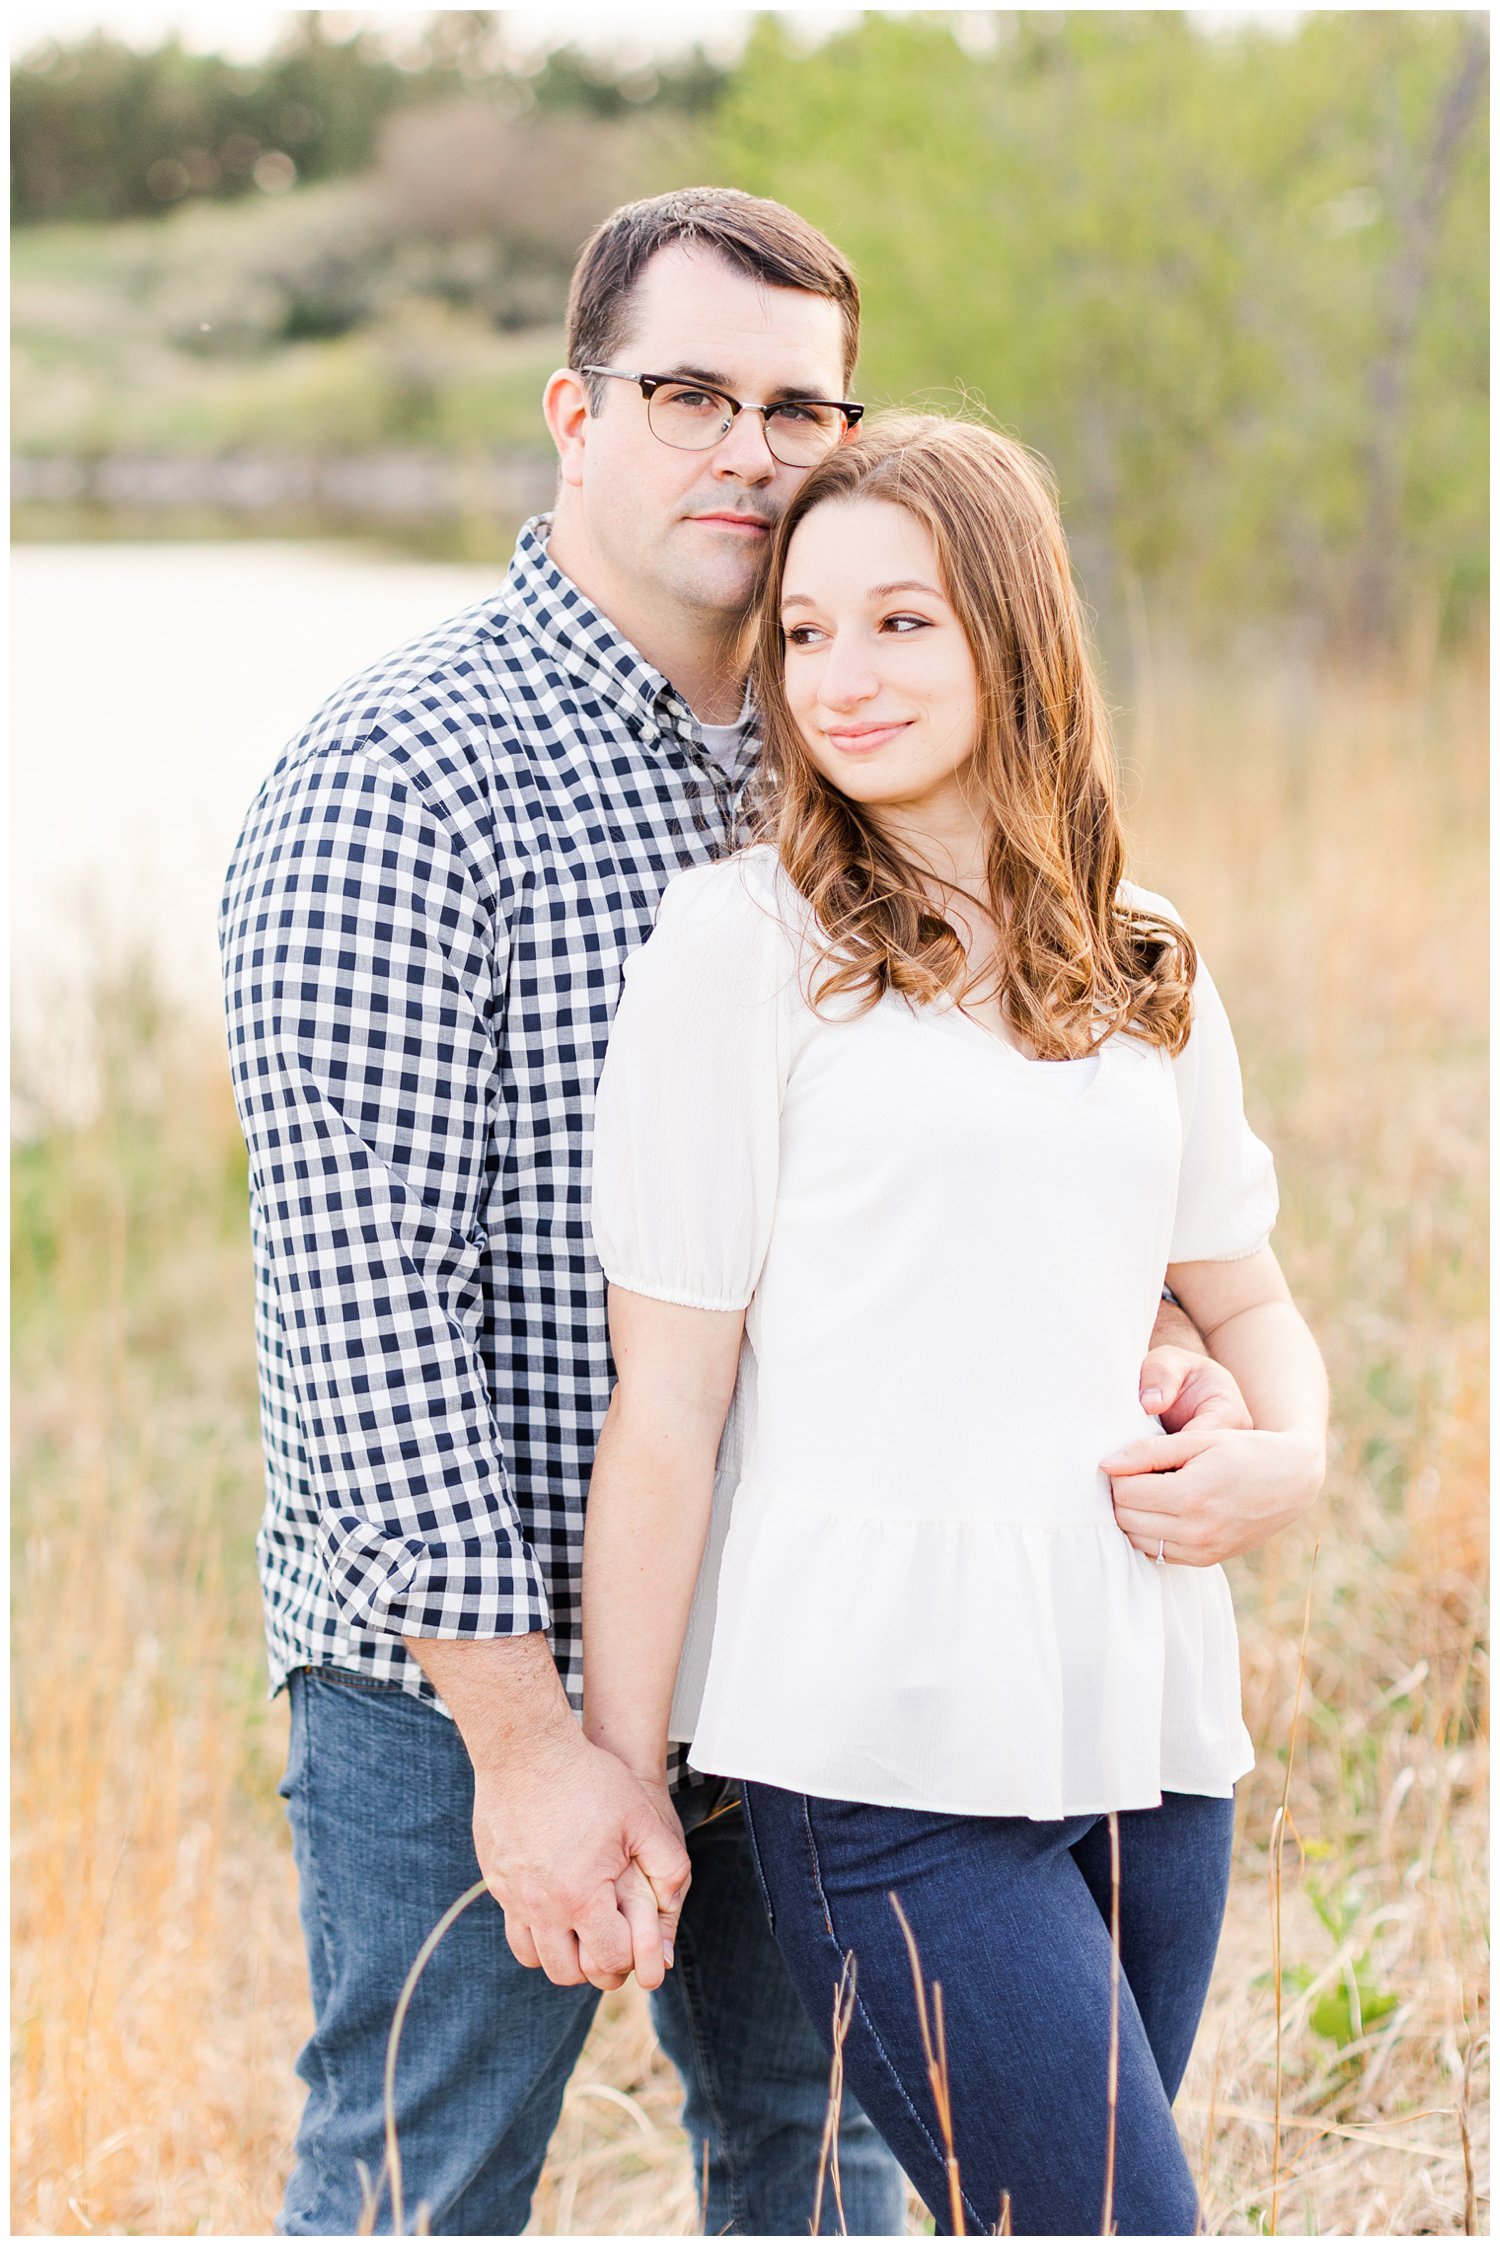 Joe and Leslie embrace in a grassy field with a lake in the background | CB Studio